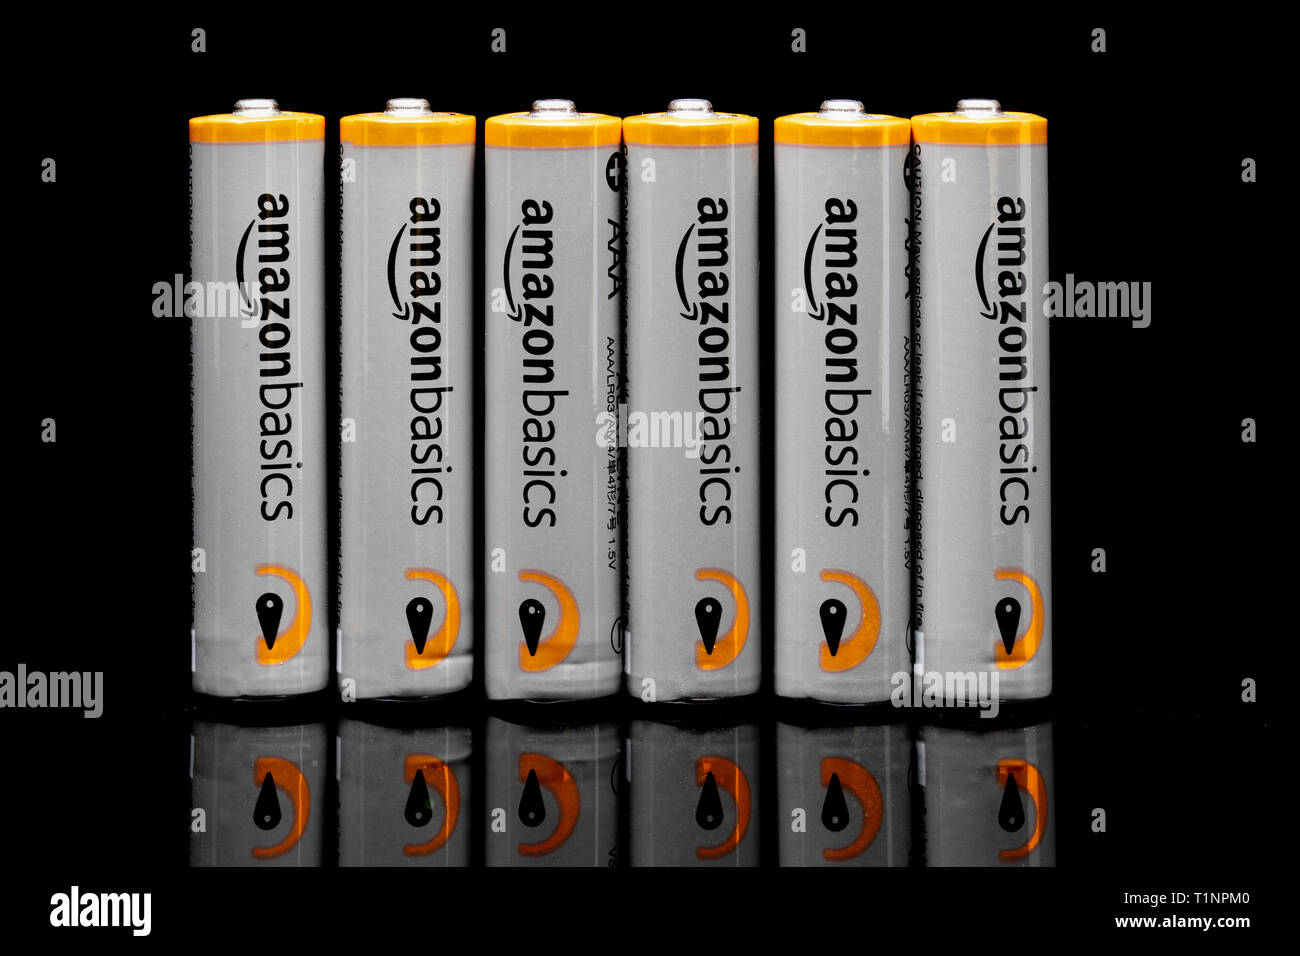 ST. PAUL, MN/USA - MARCH 18, 2019: AmazonBasics grouping of AAA batteries. AmazonBasics is a private-label that offers home goods, office supplies, an Stock Photo